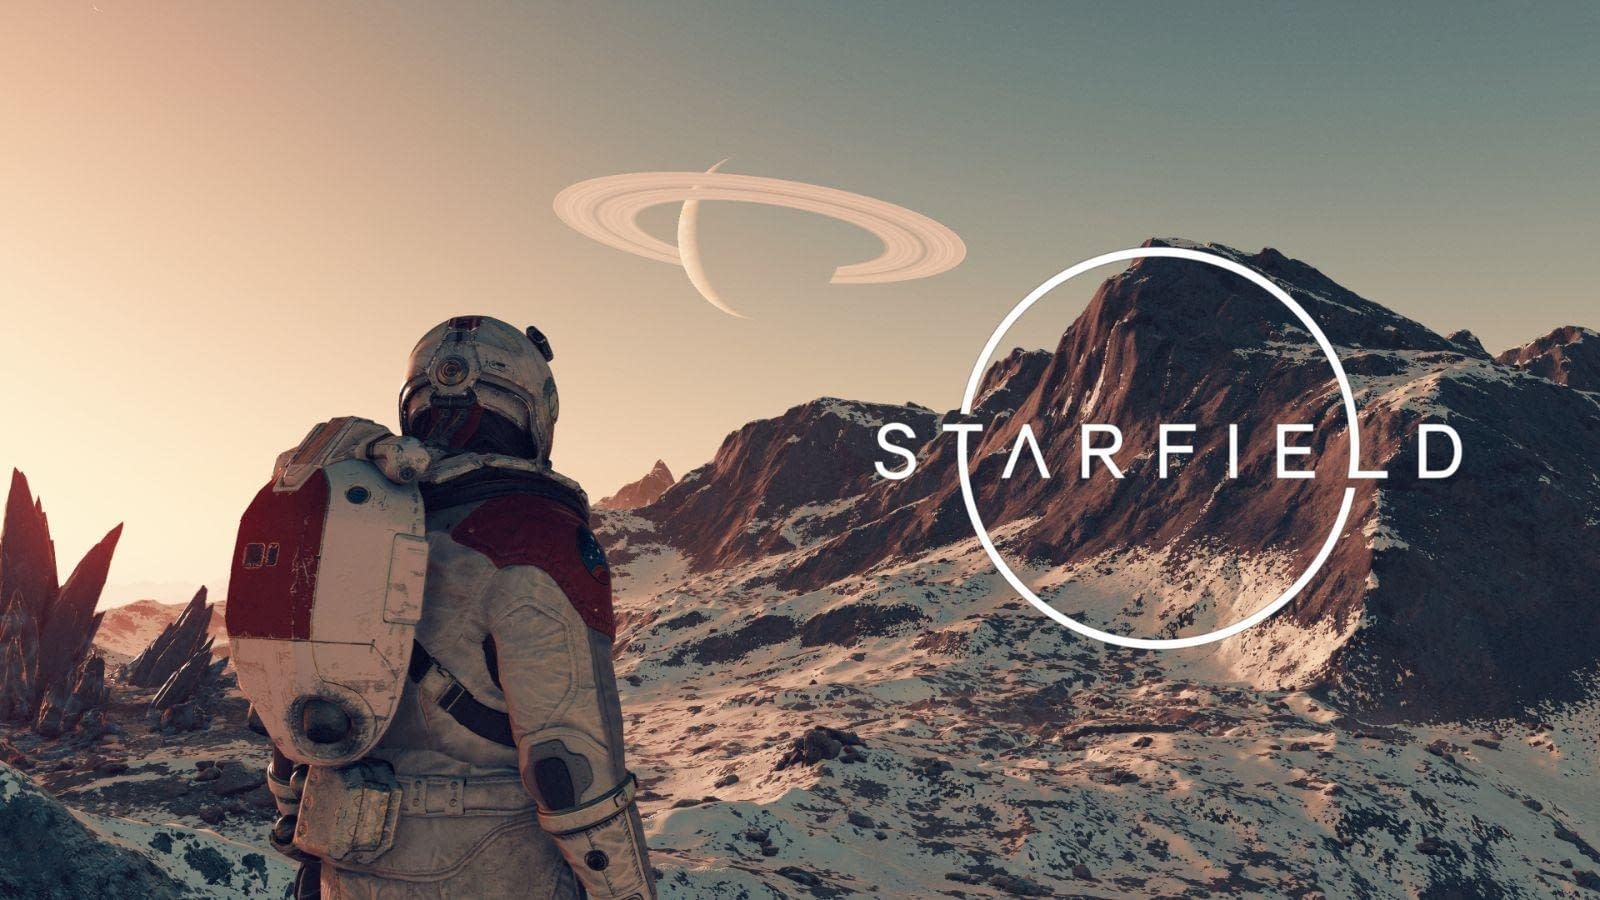 Starfield Comes with Cross Registration Support: With Anda “Play Anywhere” Tag